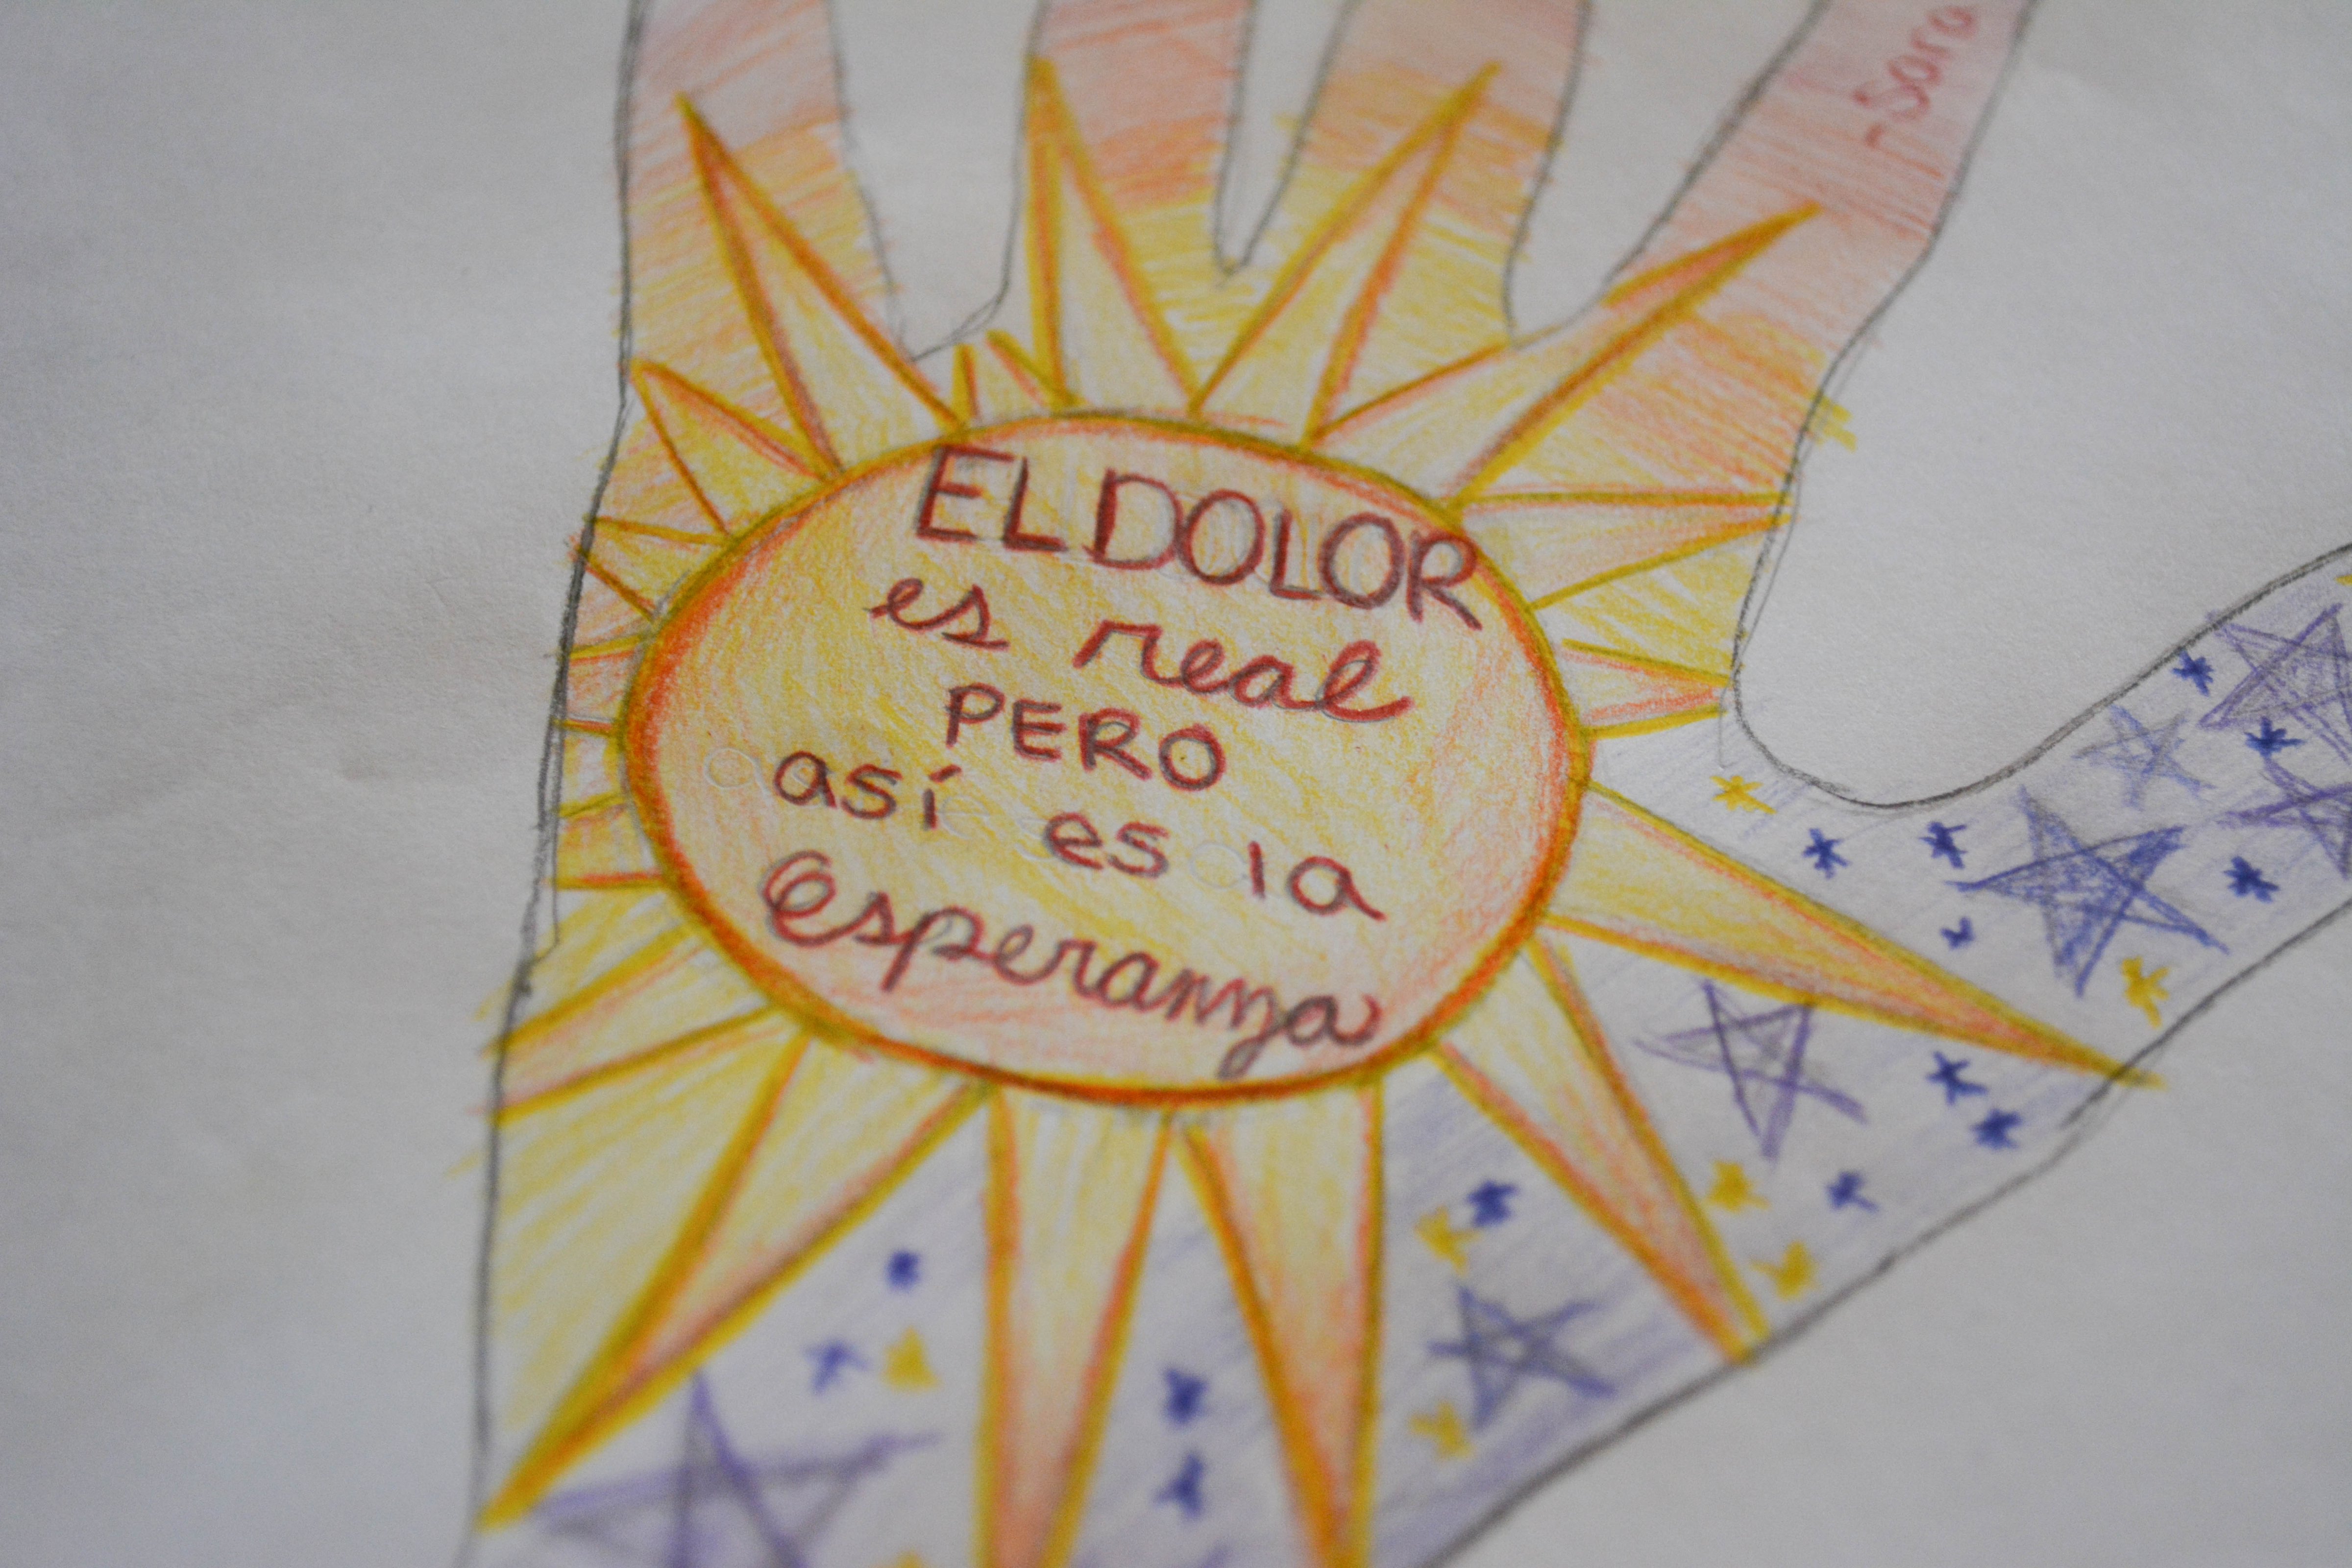 A drawing by a migrant woman in detention at the Otero County Prison in 2016 reads "Pain is real, but so is hope." Artist Haydee Alonso hosted an art workshop for migrant women. (Courtesy Edgar Picazo)